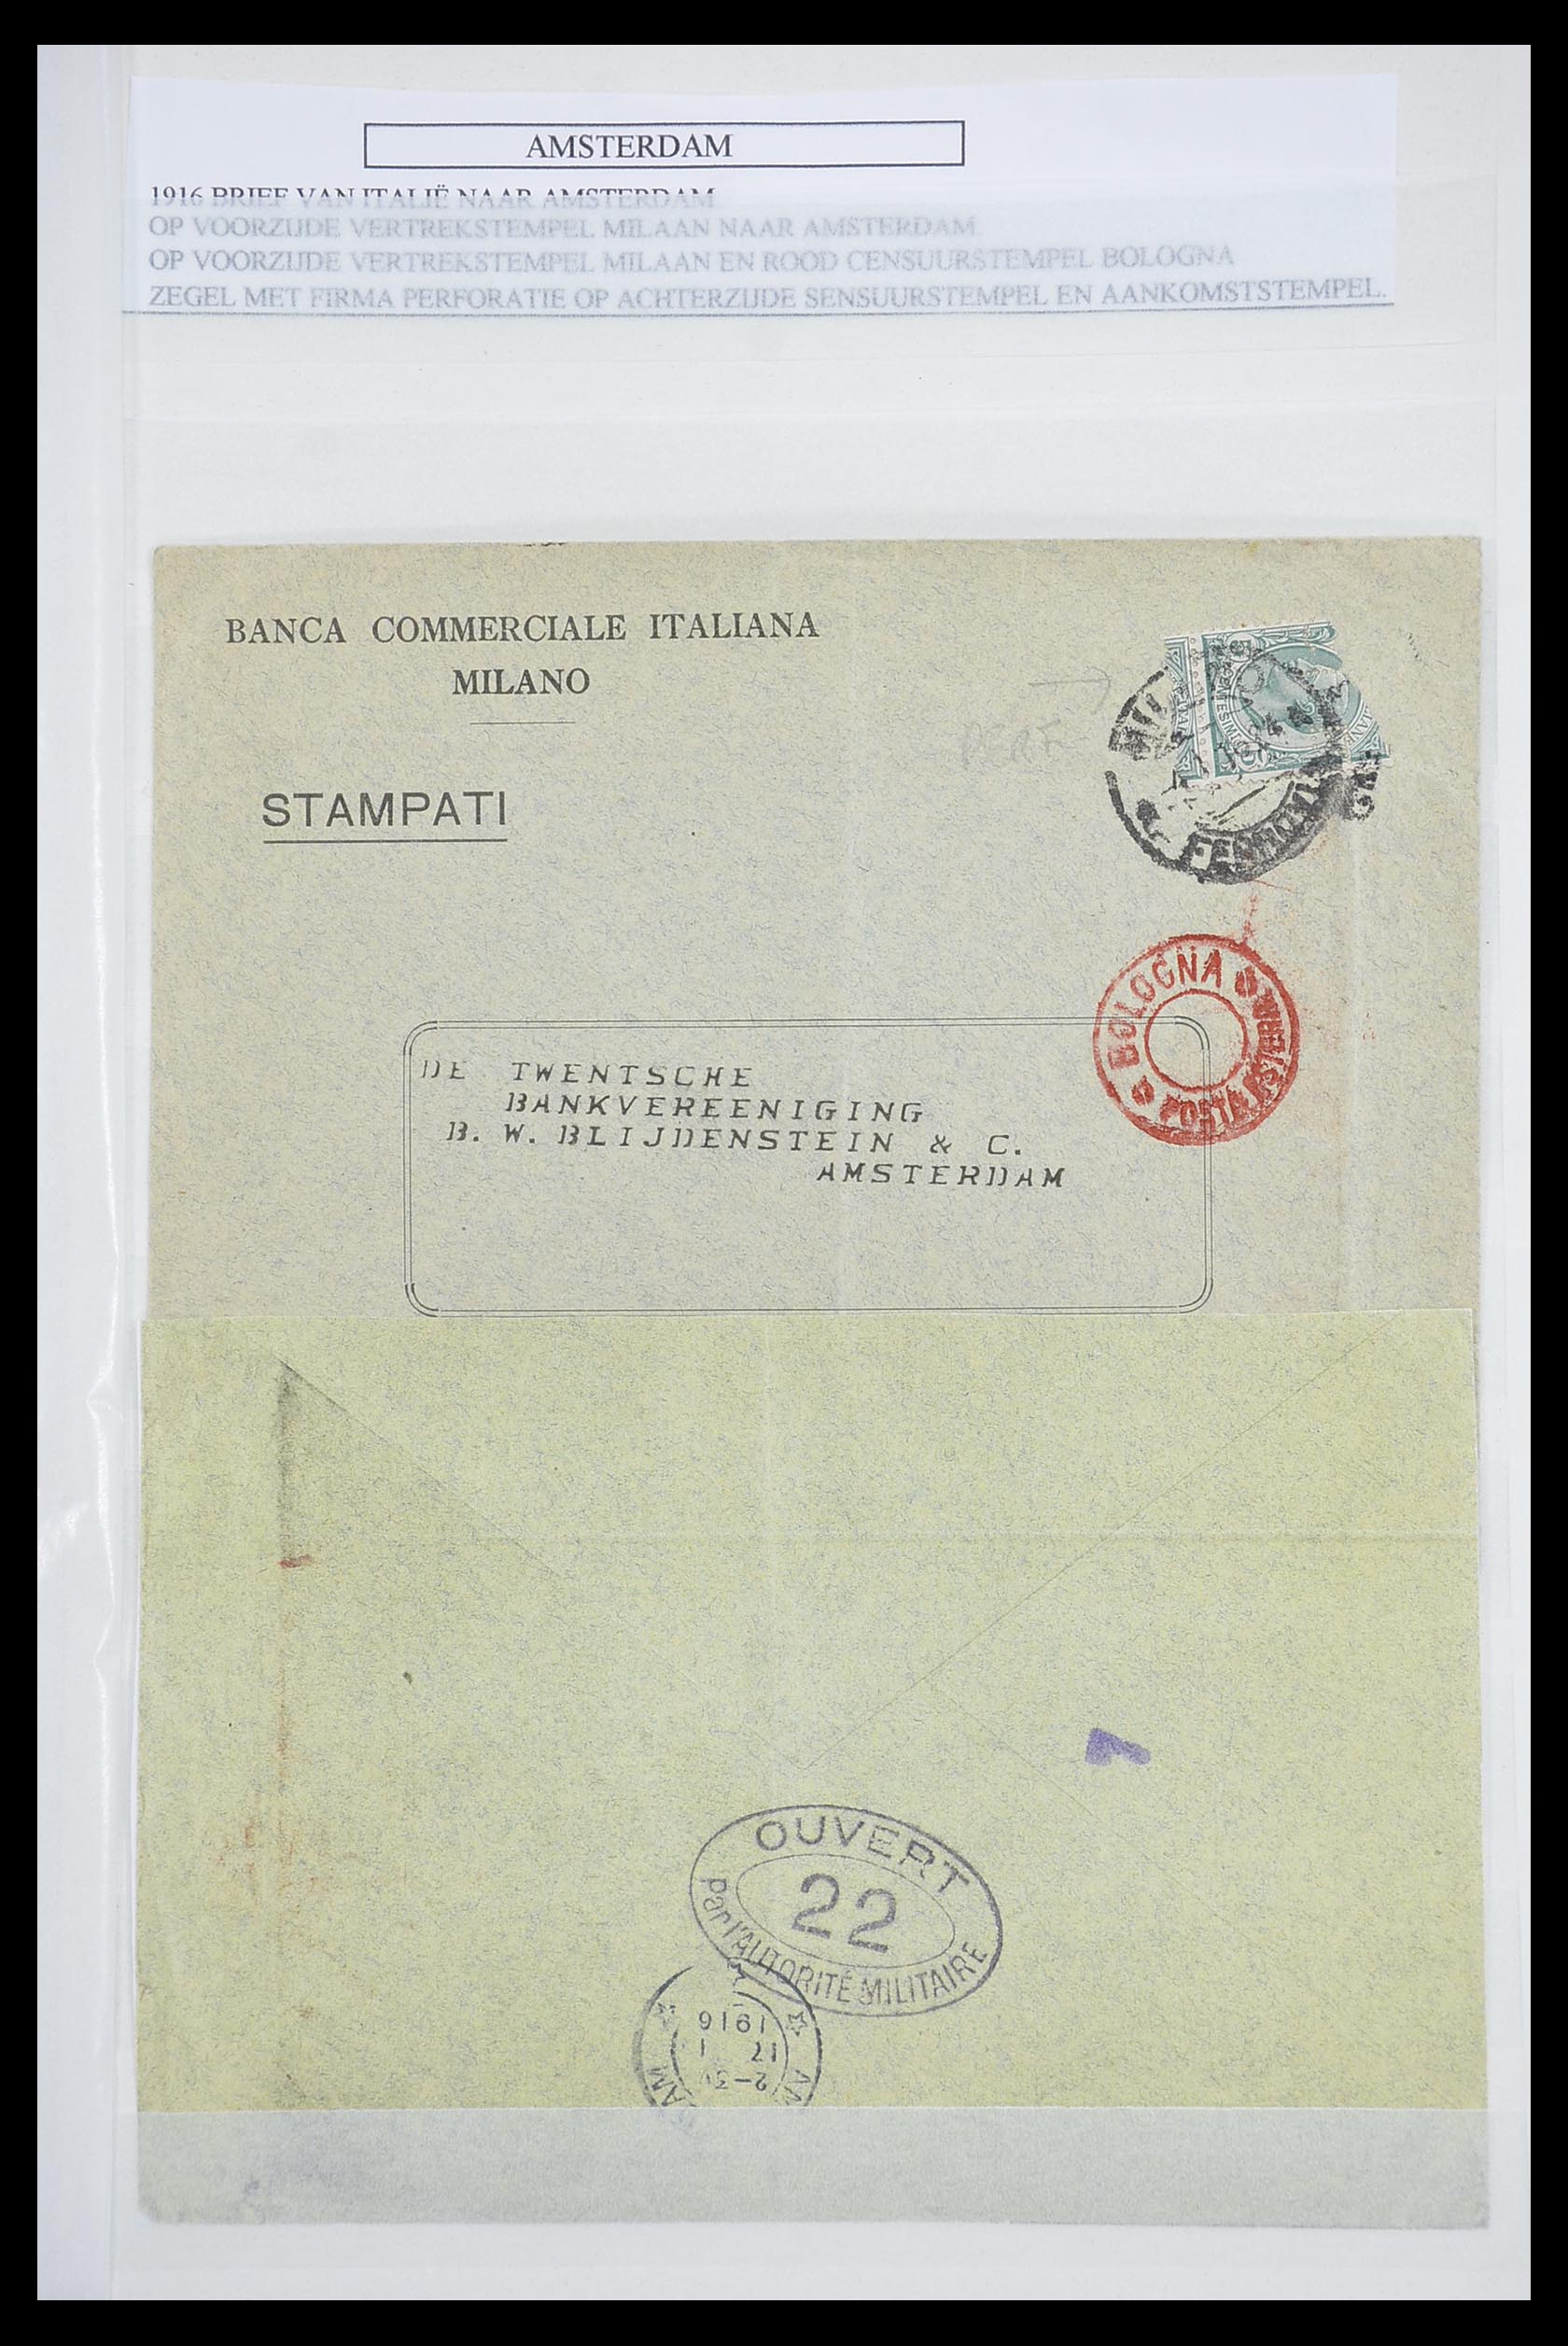 33529 011 - Stamp collection 33529 Netherlands covers 1st and 2nd world war.